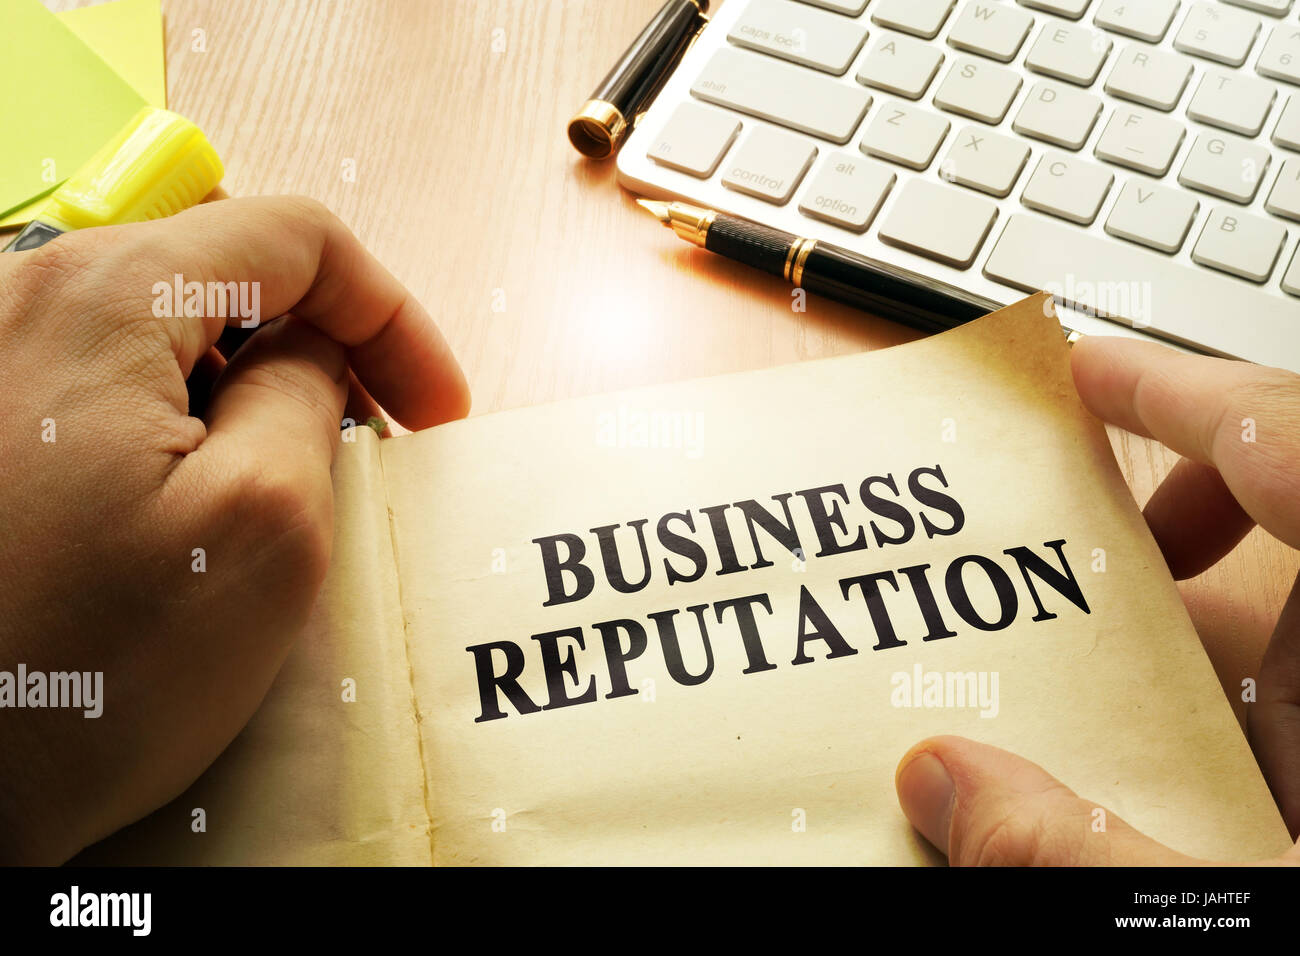 Hands holding documents with title Business Reputation. Stock Photo